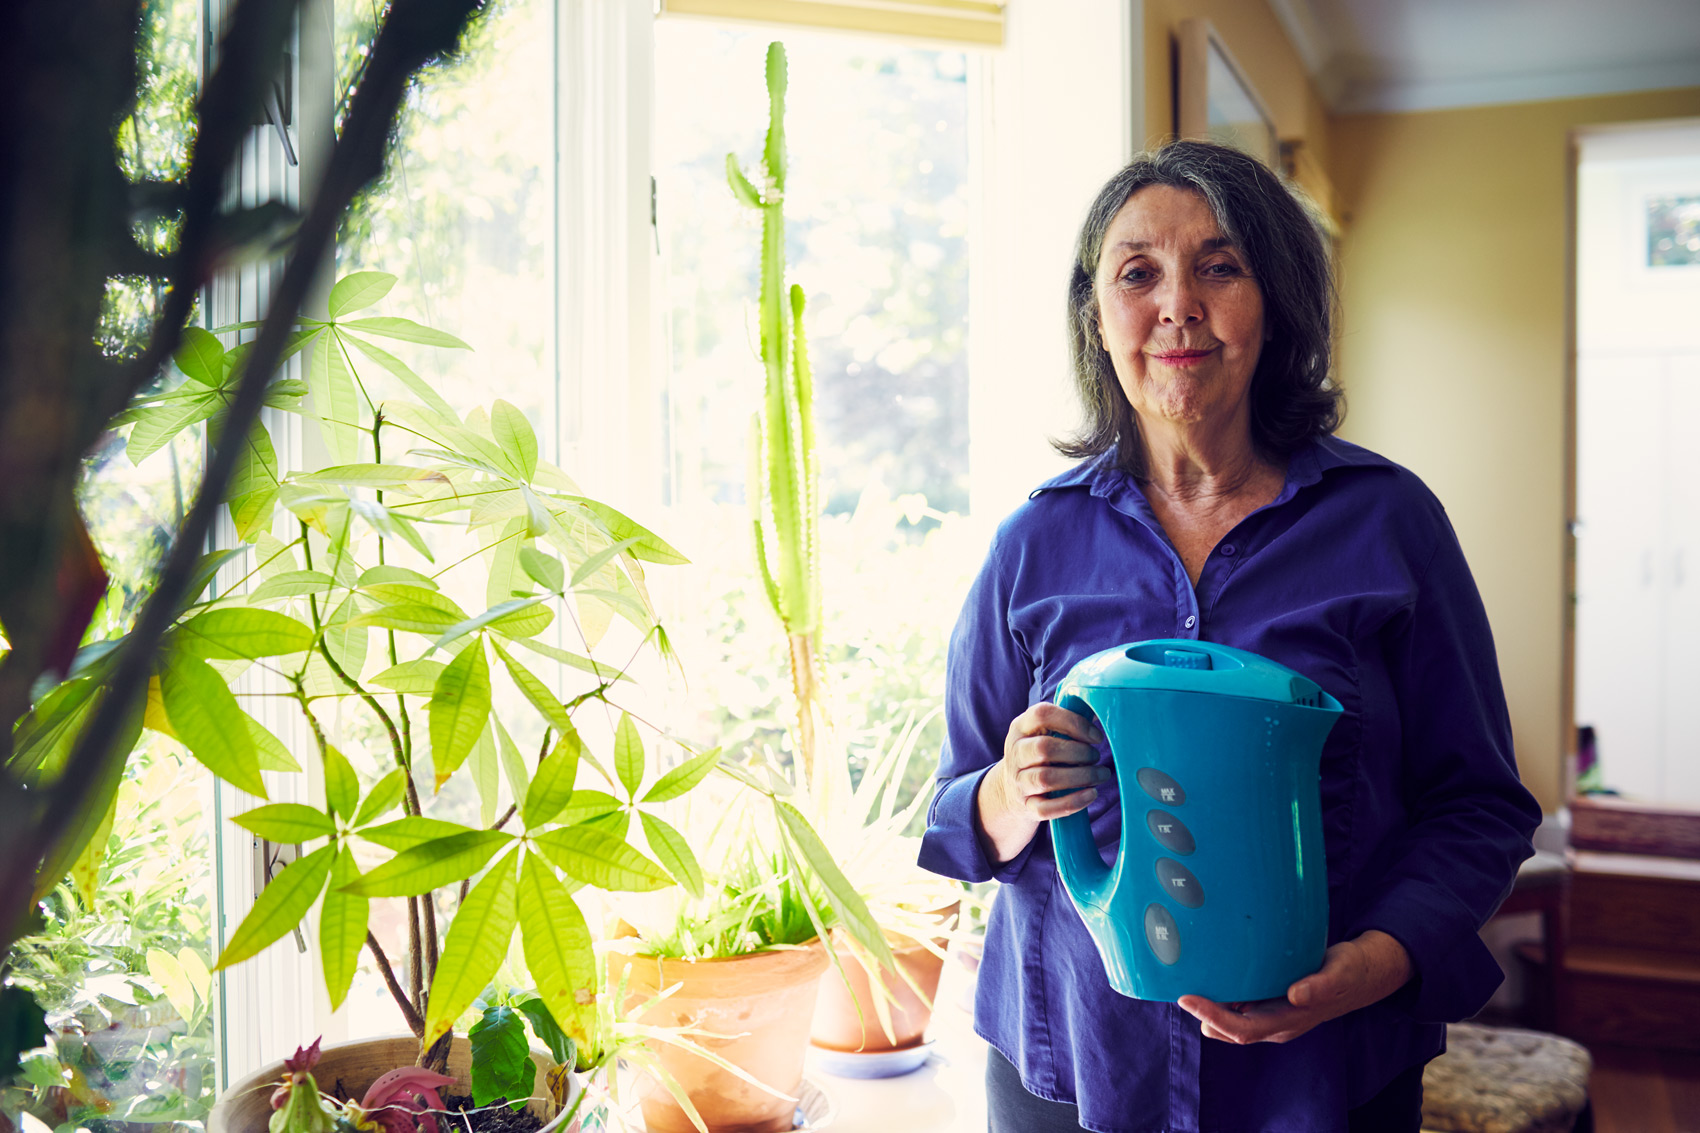 mature woman in blue shirt holding watering can, washington dc commercial photography